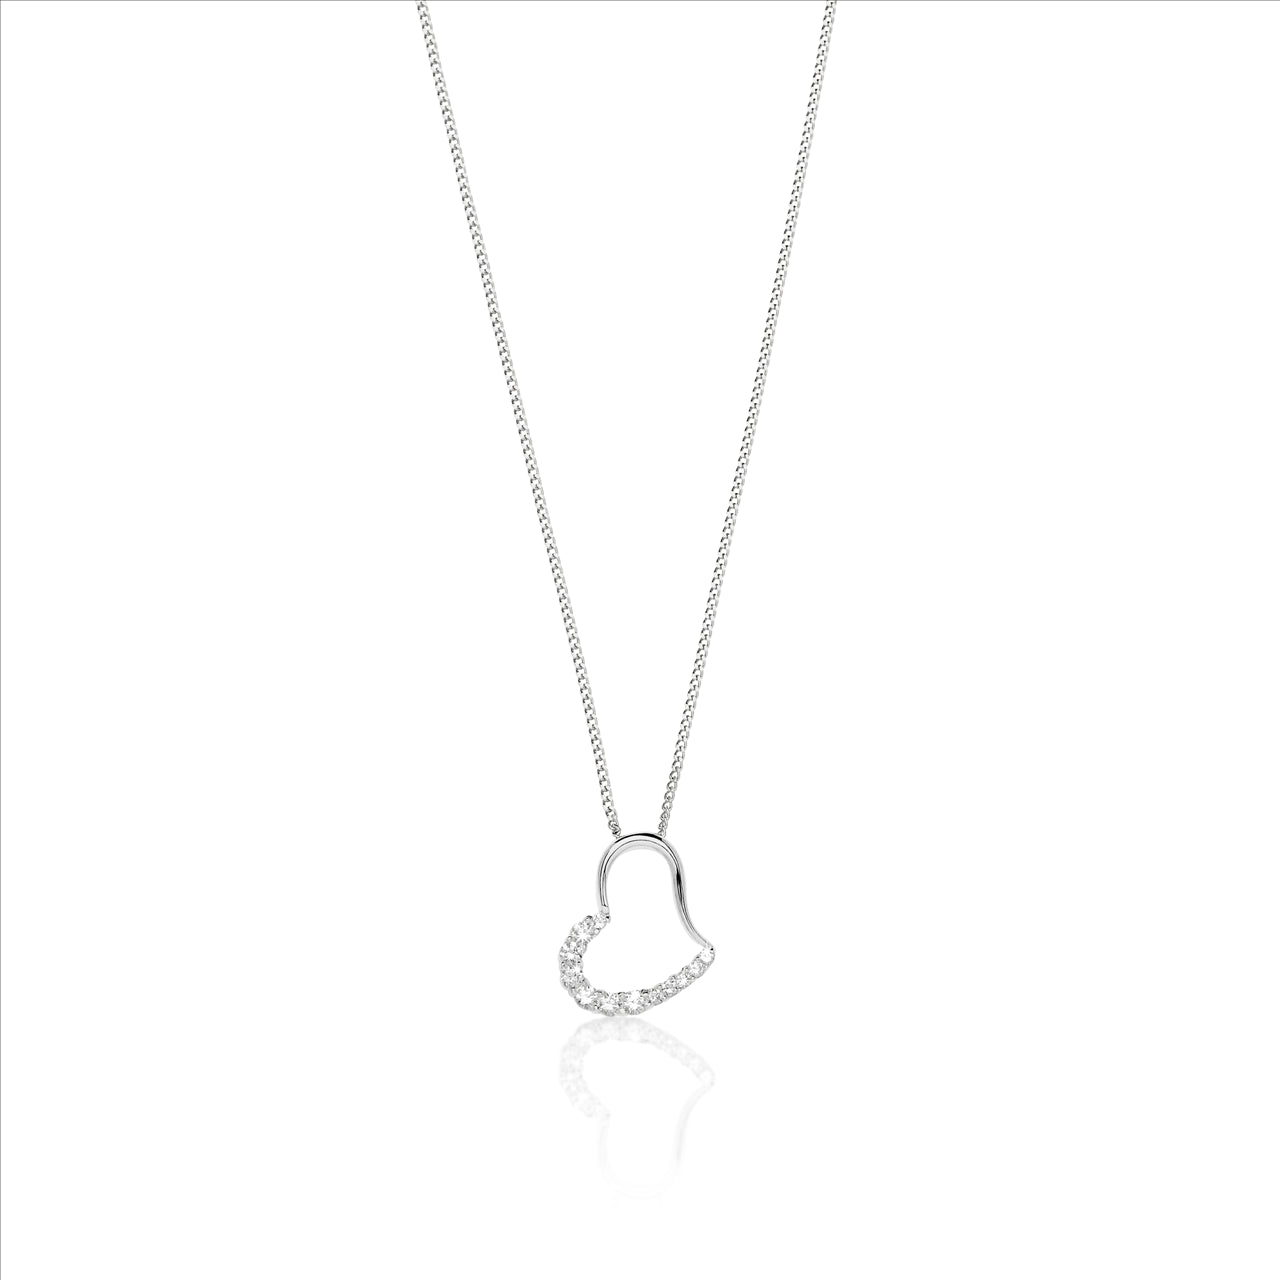 White Gold Heart Slider Pendant with Cubic Zironia